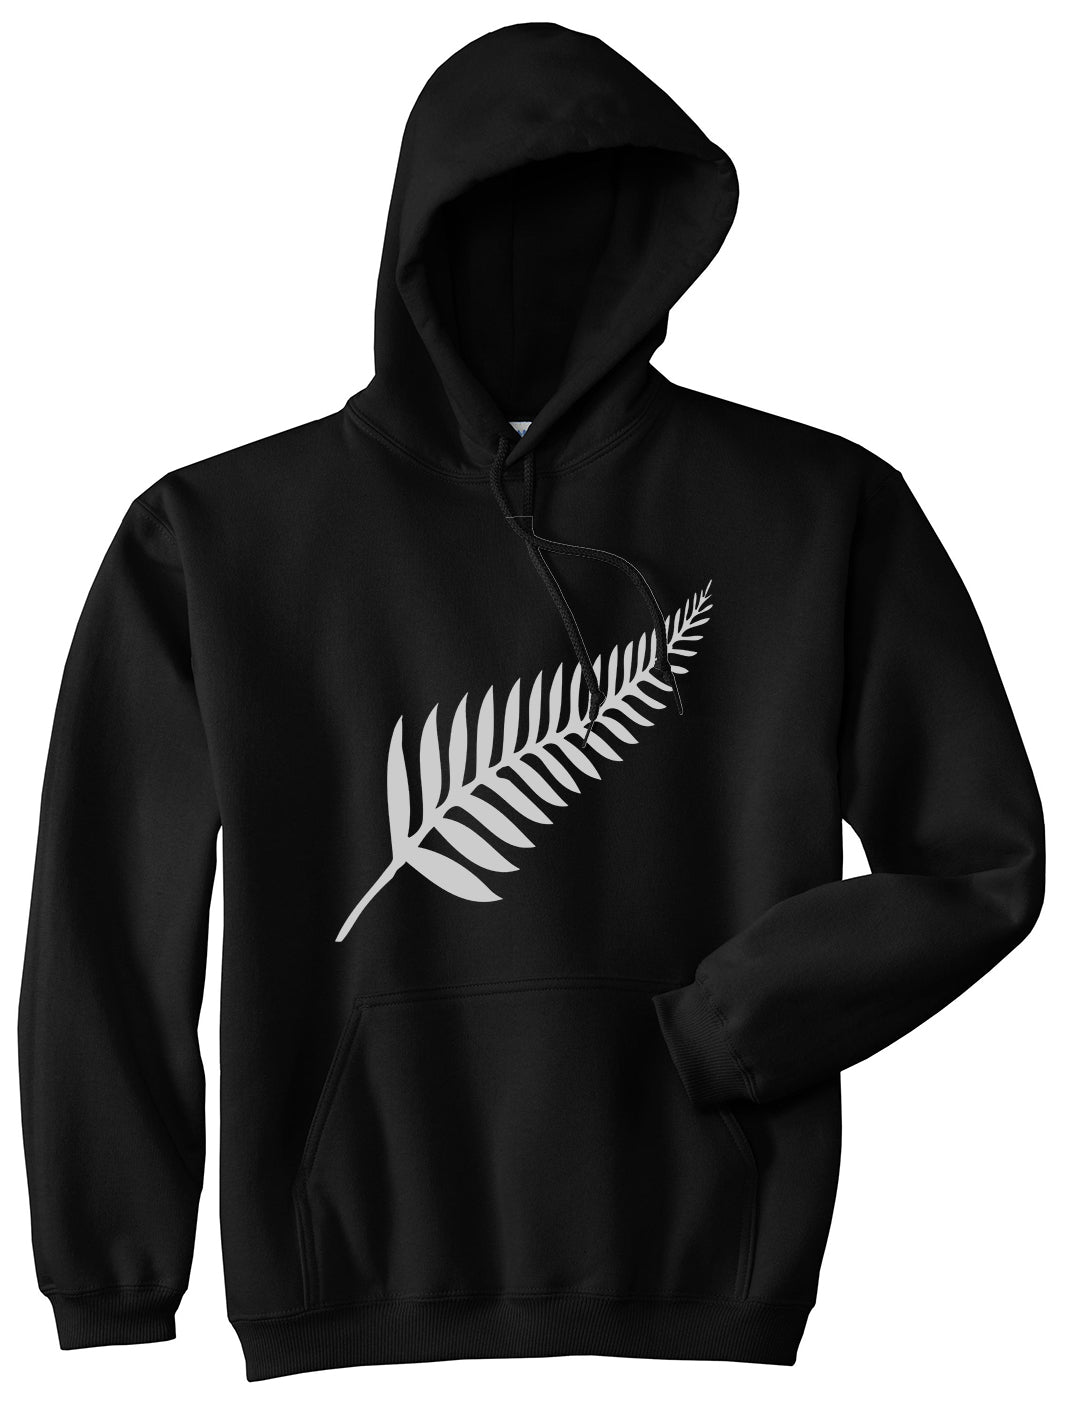 New Zealand Pride Silver Fern Rugby Chest Mens Pullover Hoodie Black